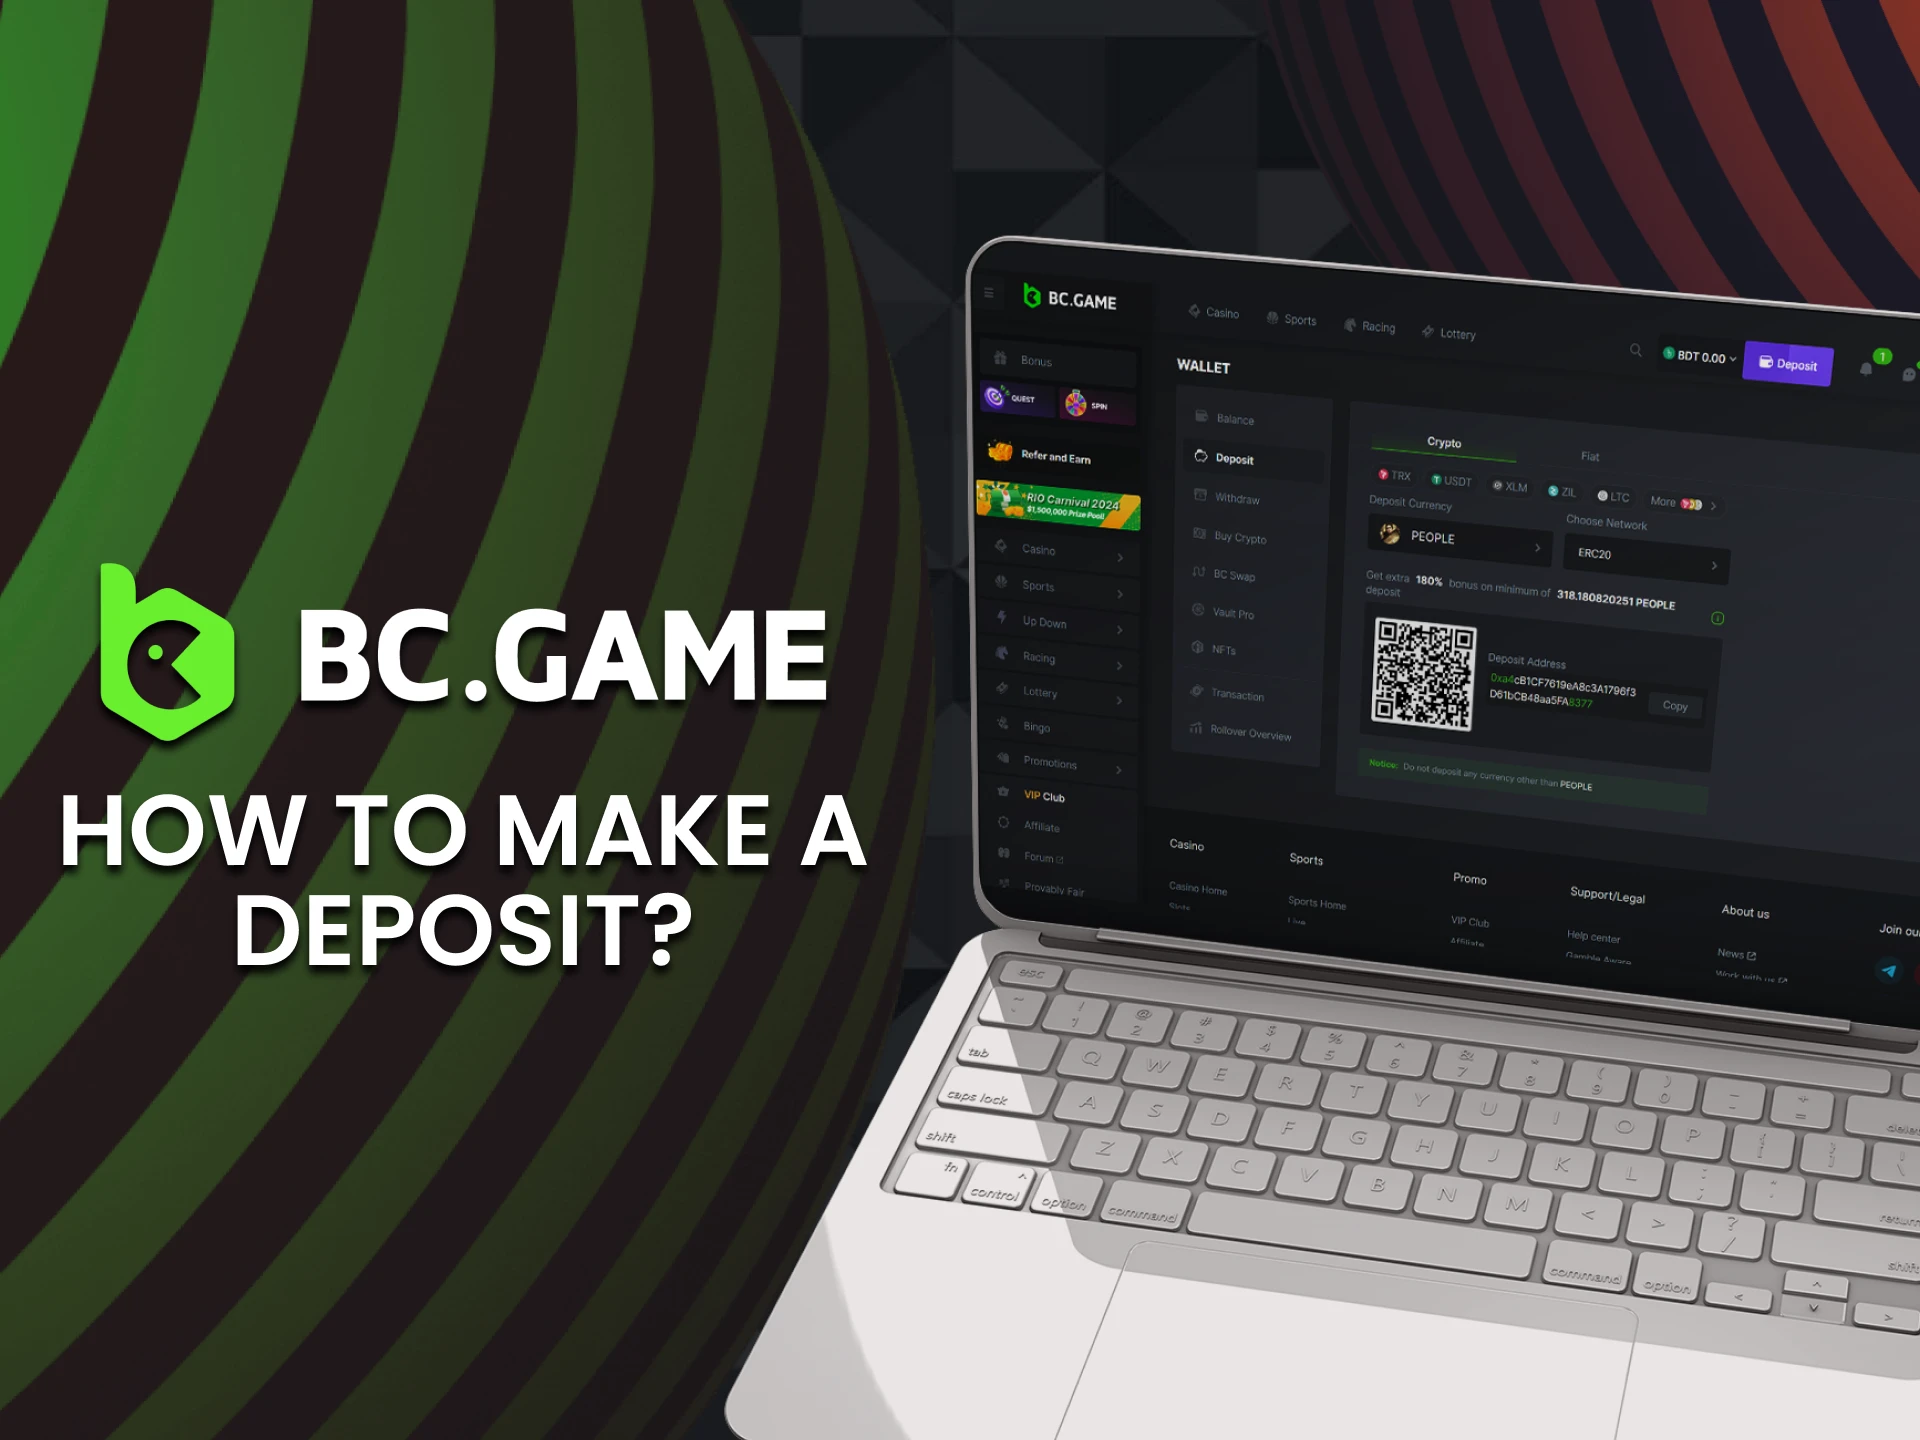 Deposit money to BC Game in 6 easy steps.